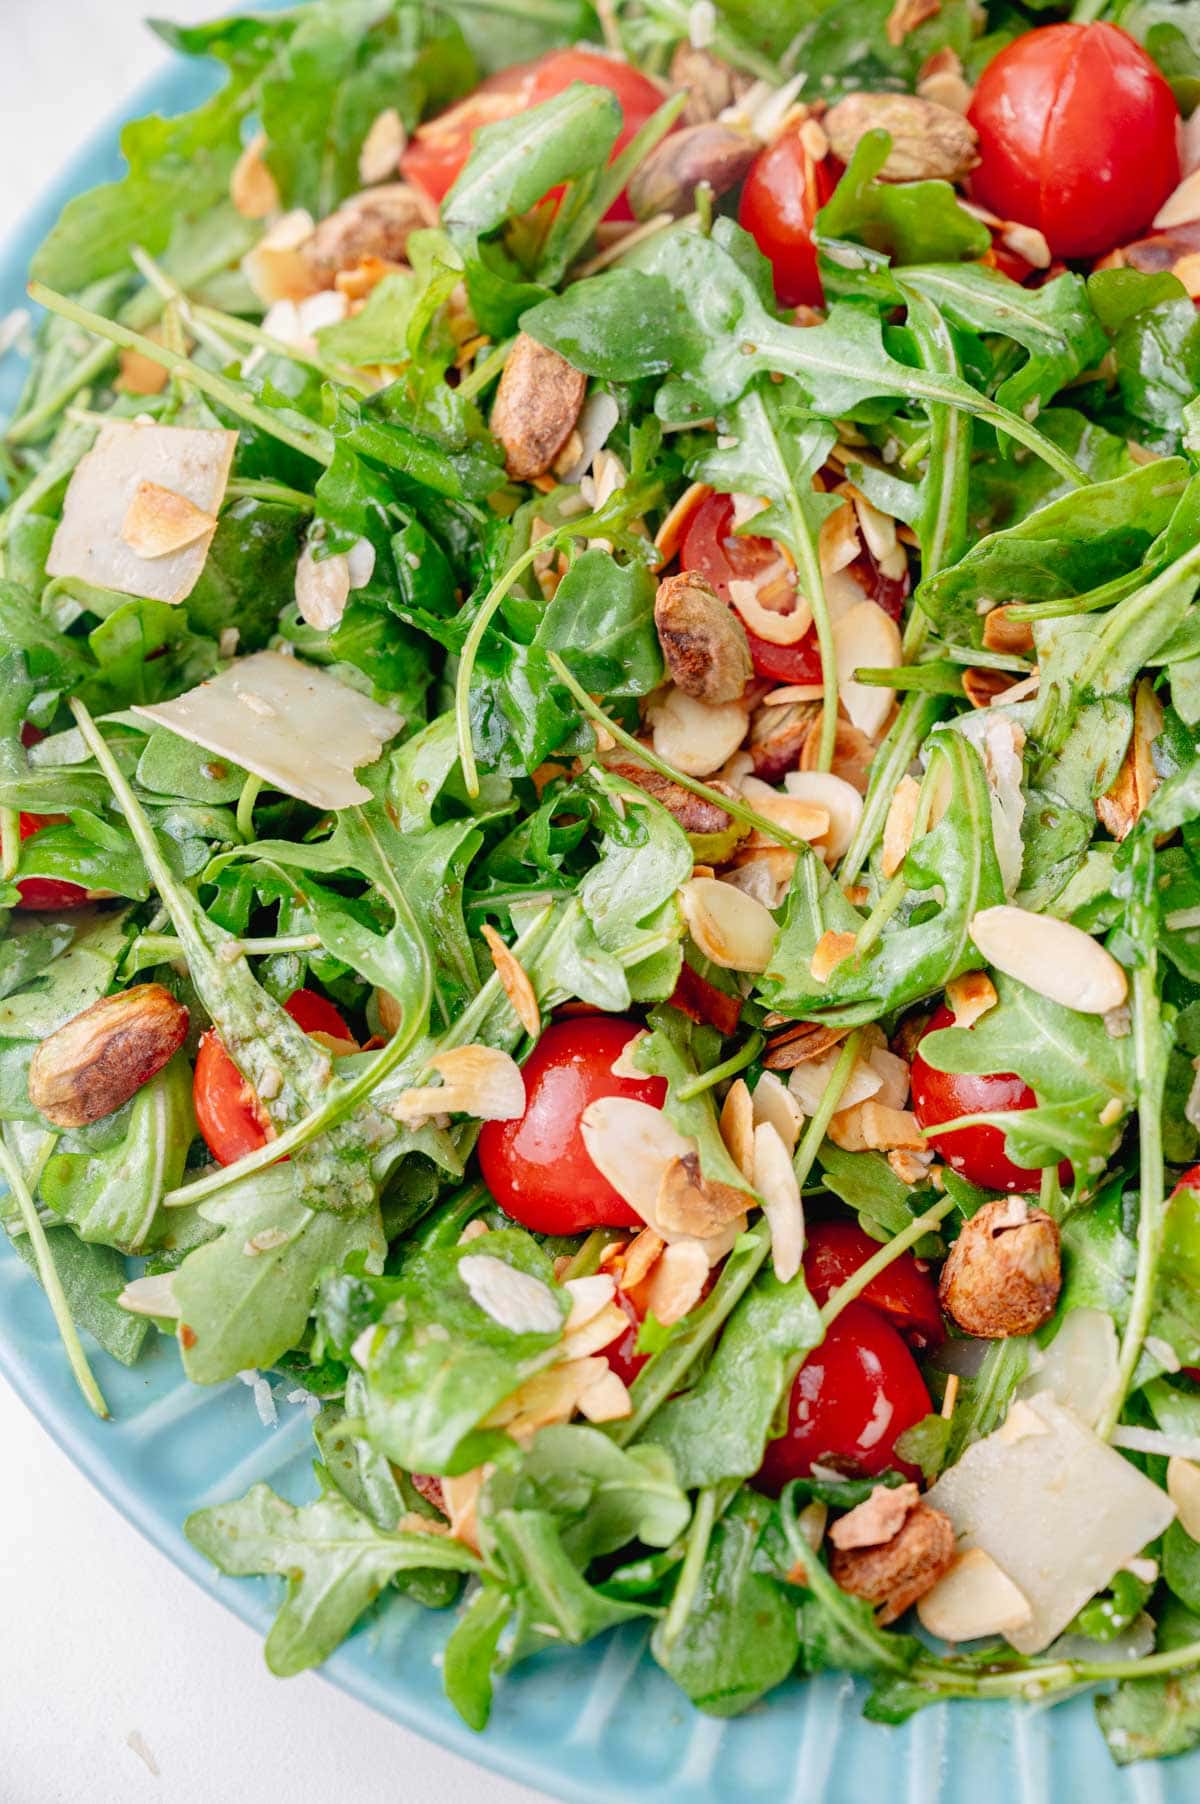 A close up photo of arugula salad with tomatoes, nuts, and parmesan on a blue plate.